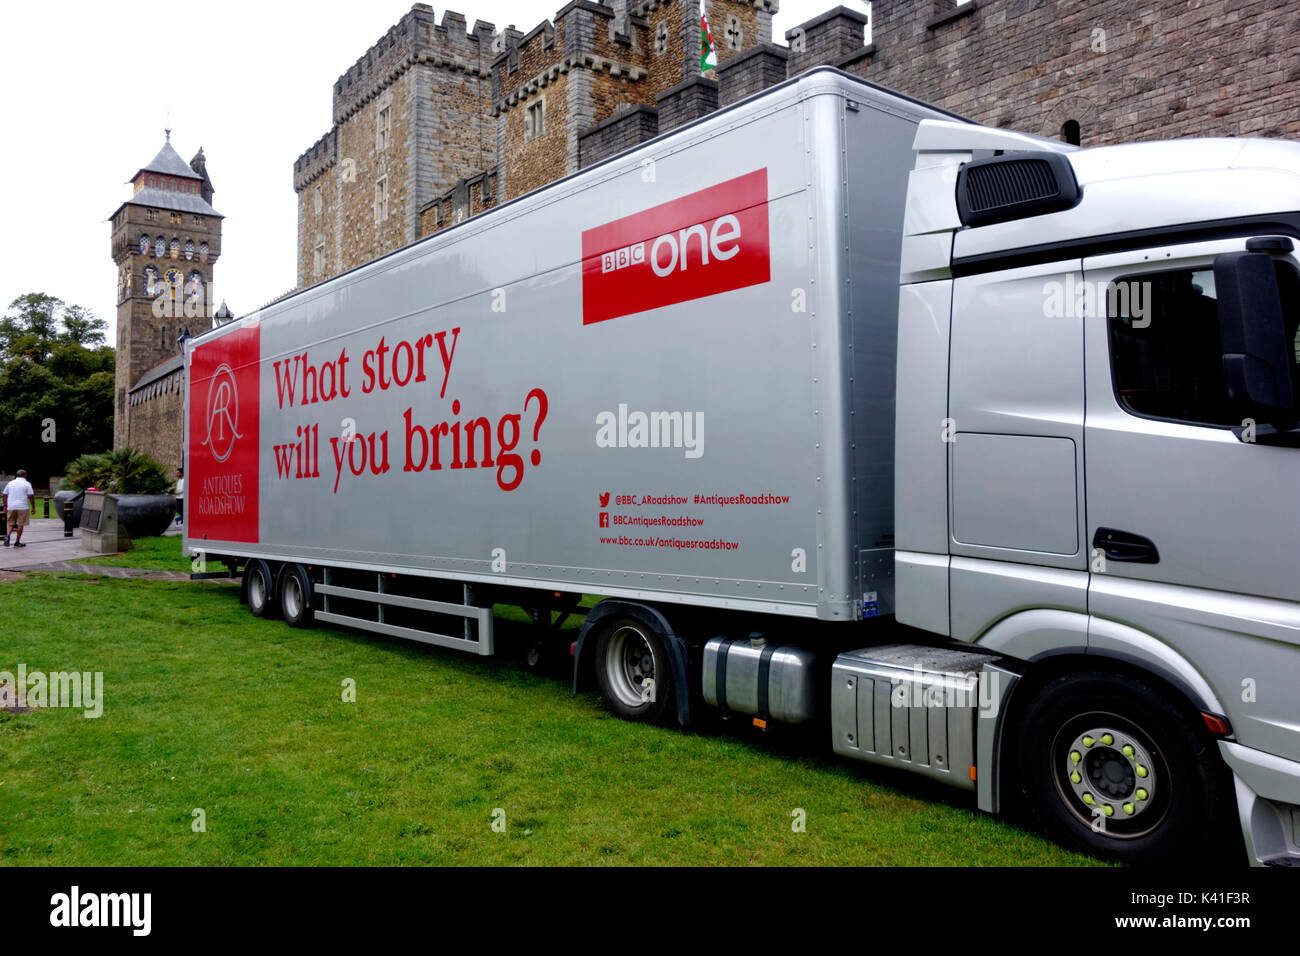 BBC Antiques Roadshow Lorry, Cardiff Castle, Wales. Stock Photo